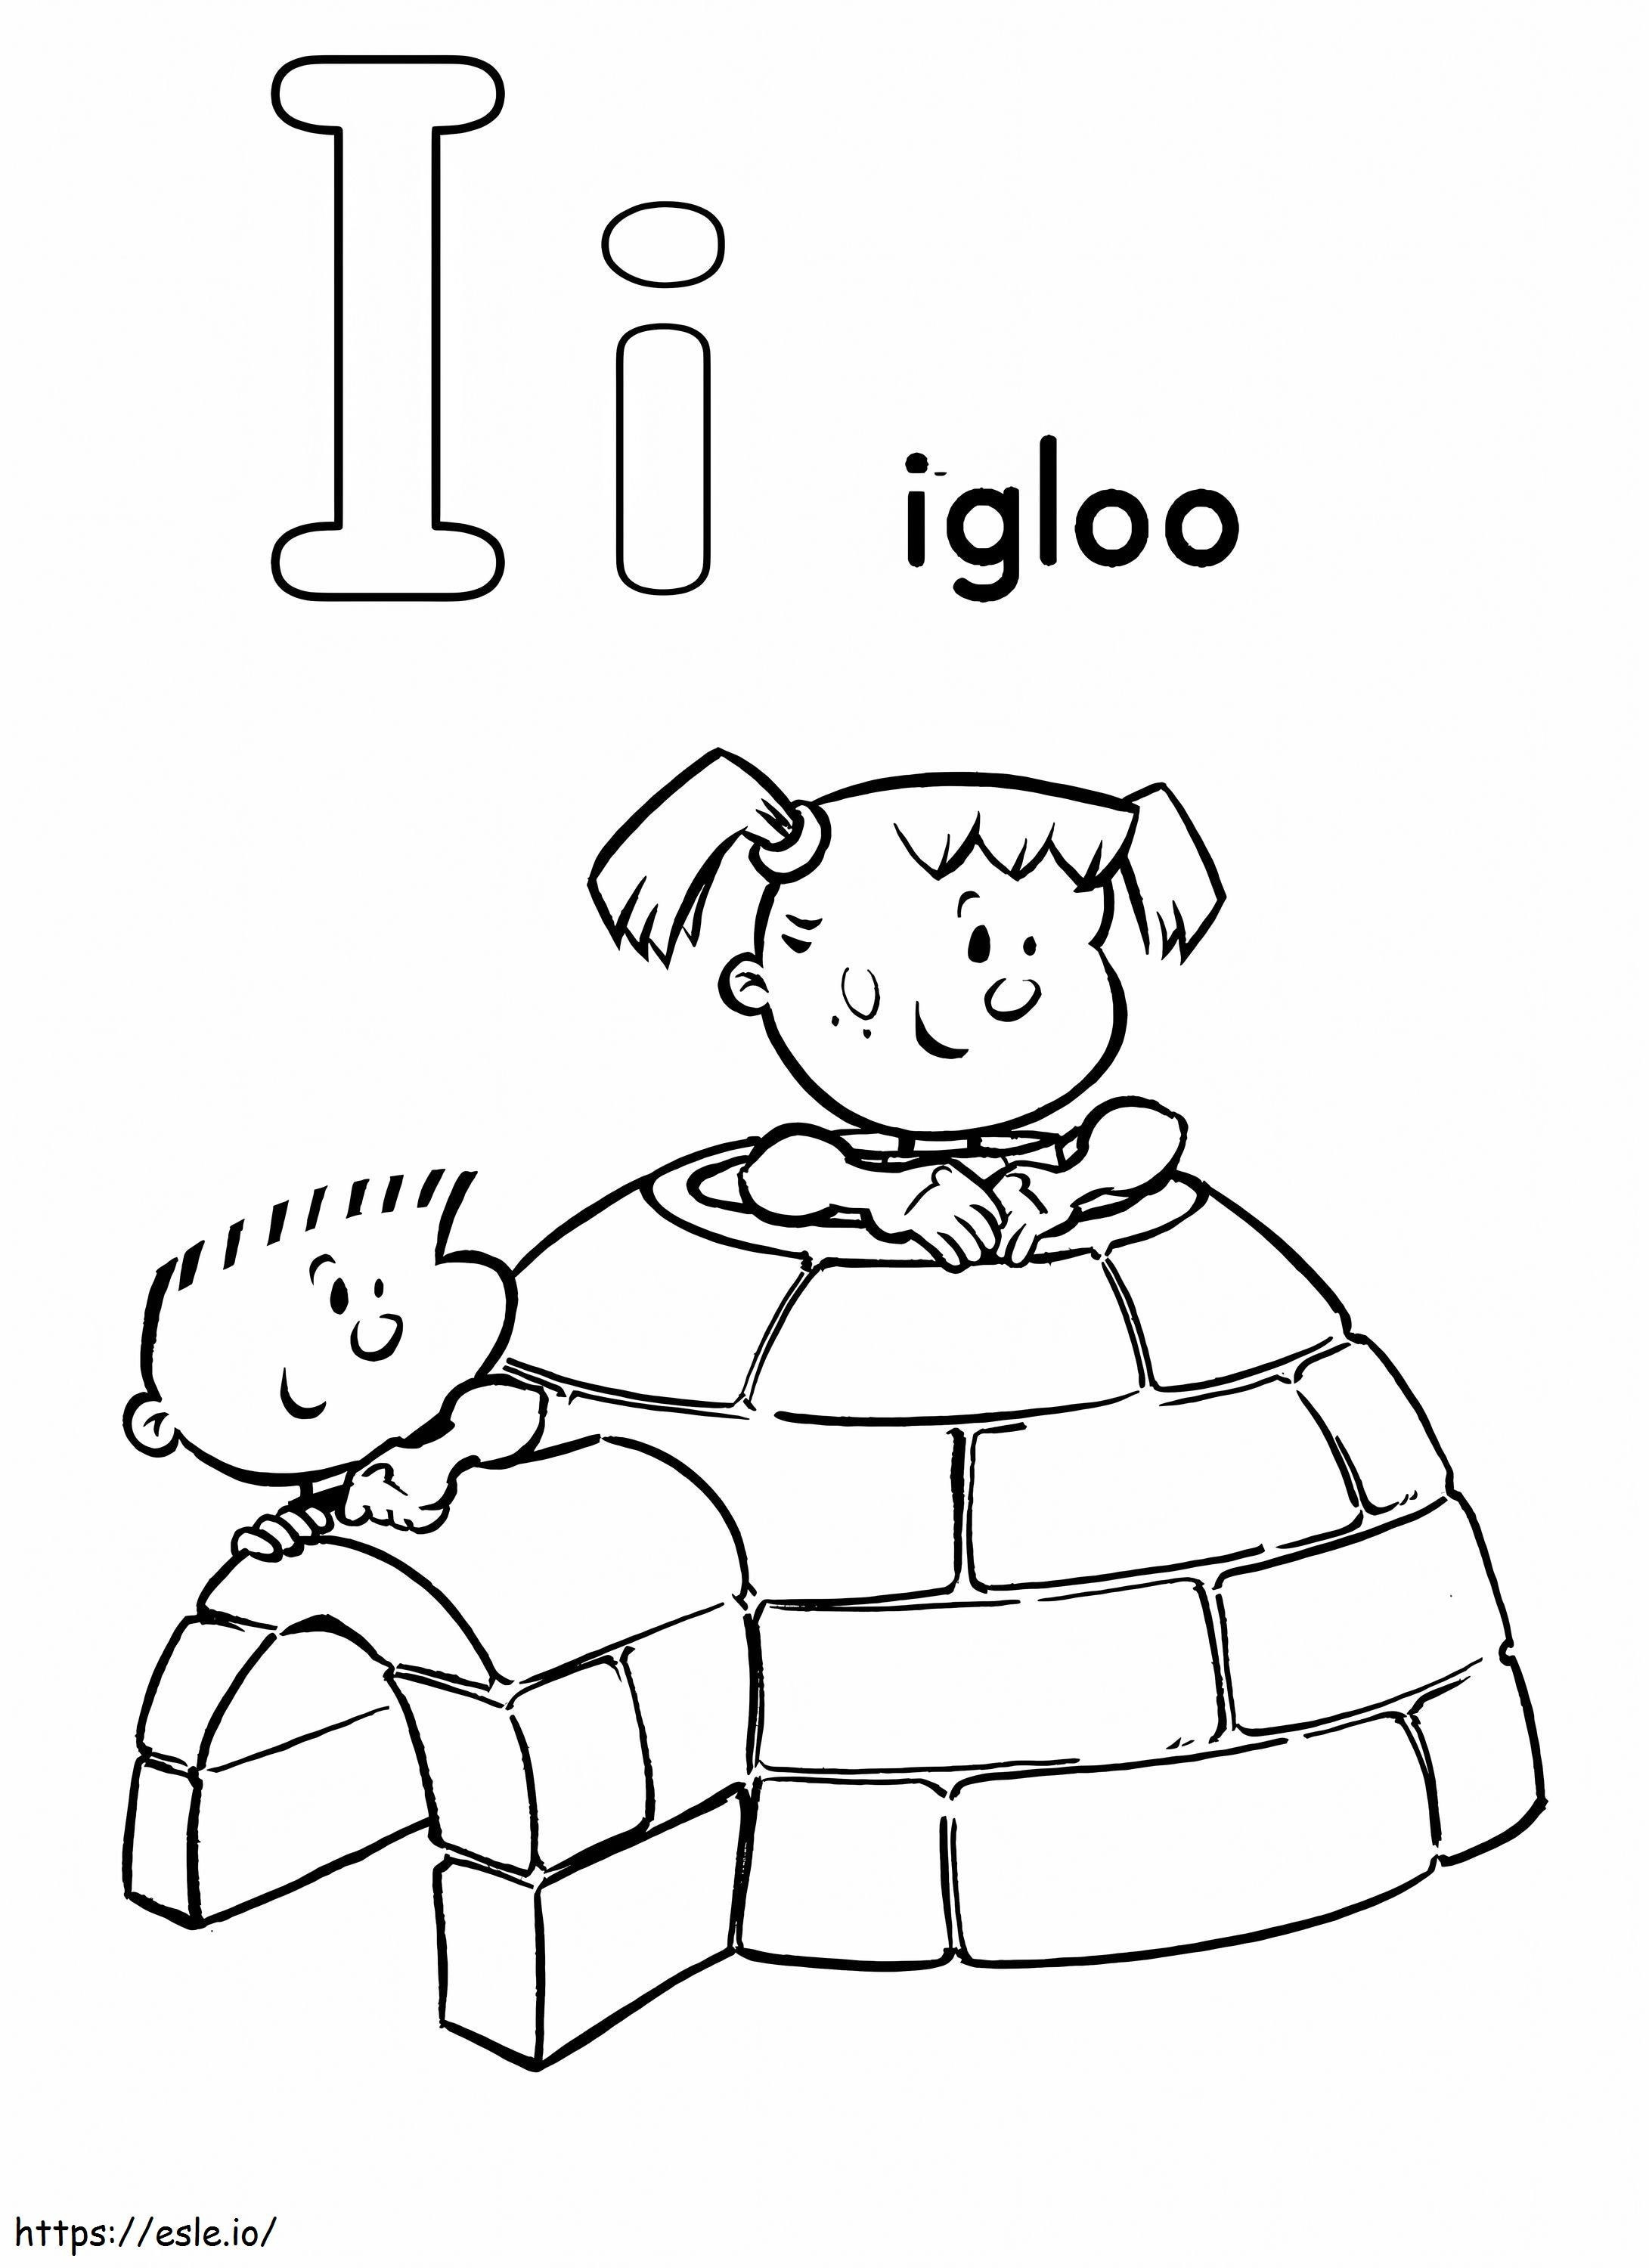 Free Igloo For Kids coloring page